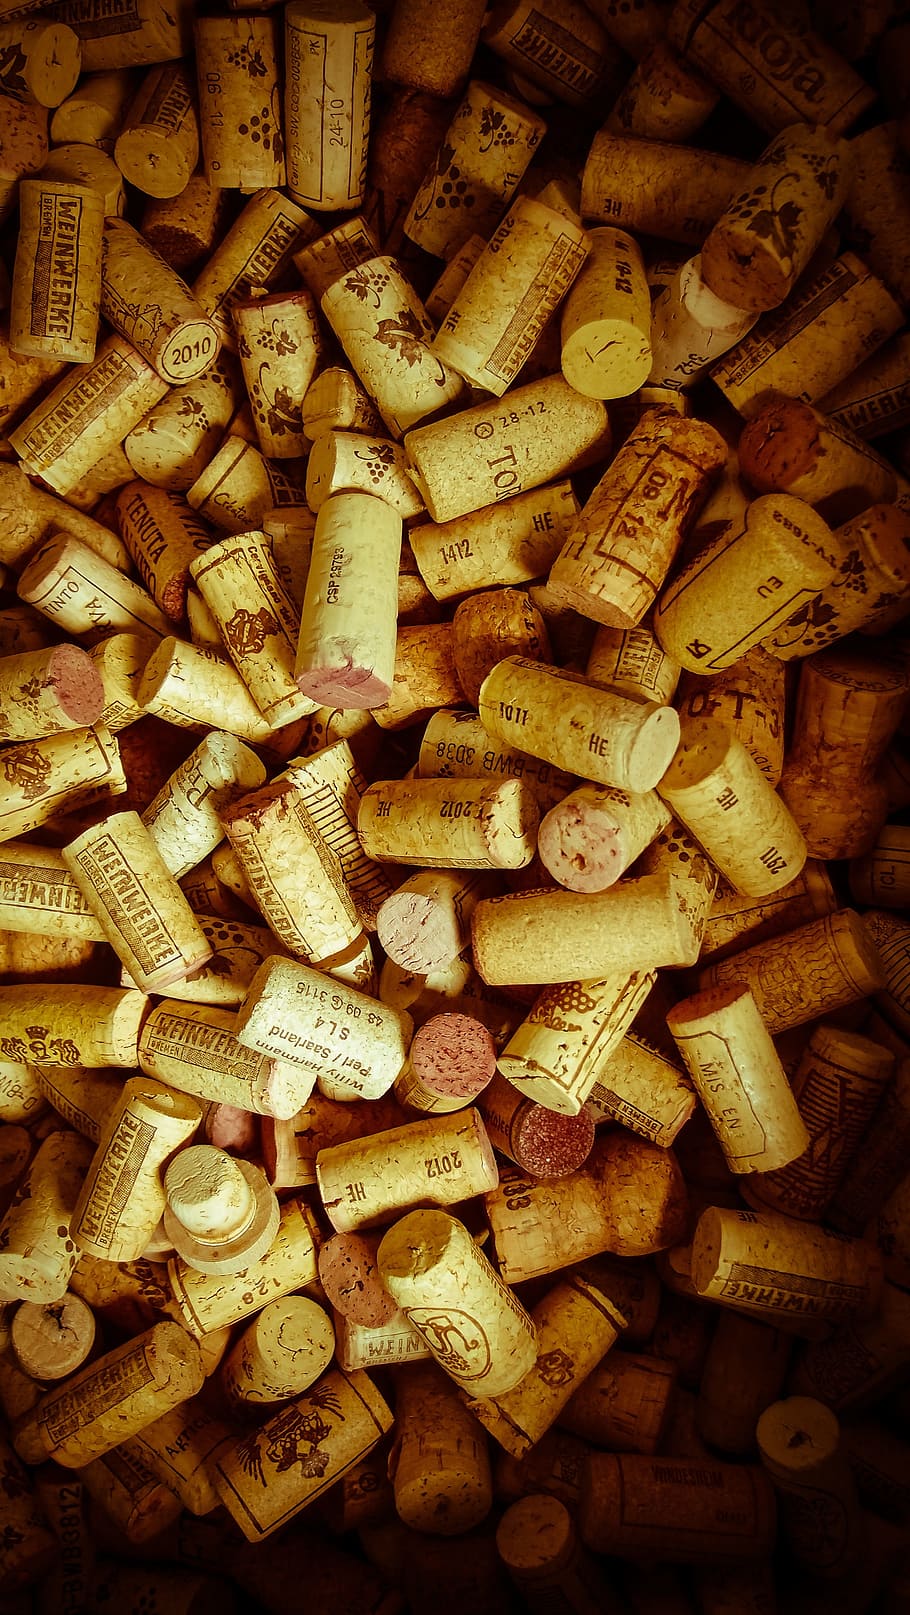 pile of corks, cork, wine corks, collection, bottle corks, bottle closure, close, wine, closures, large group of objects